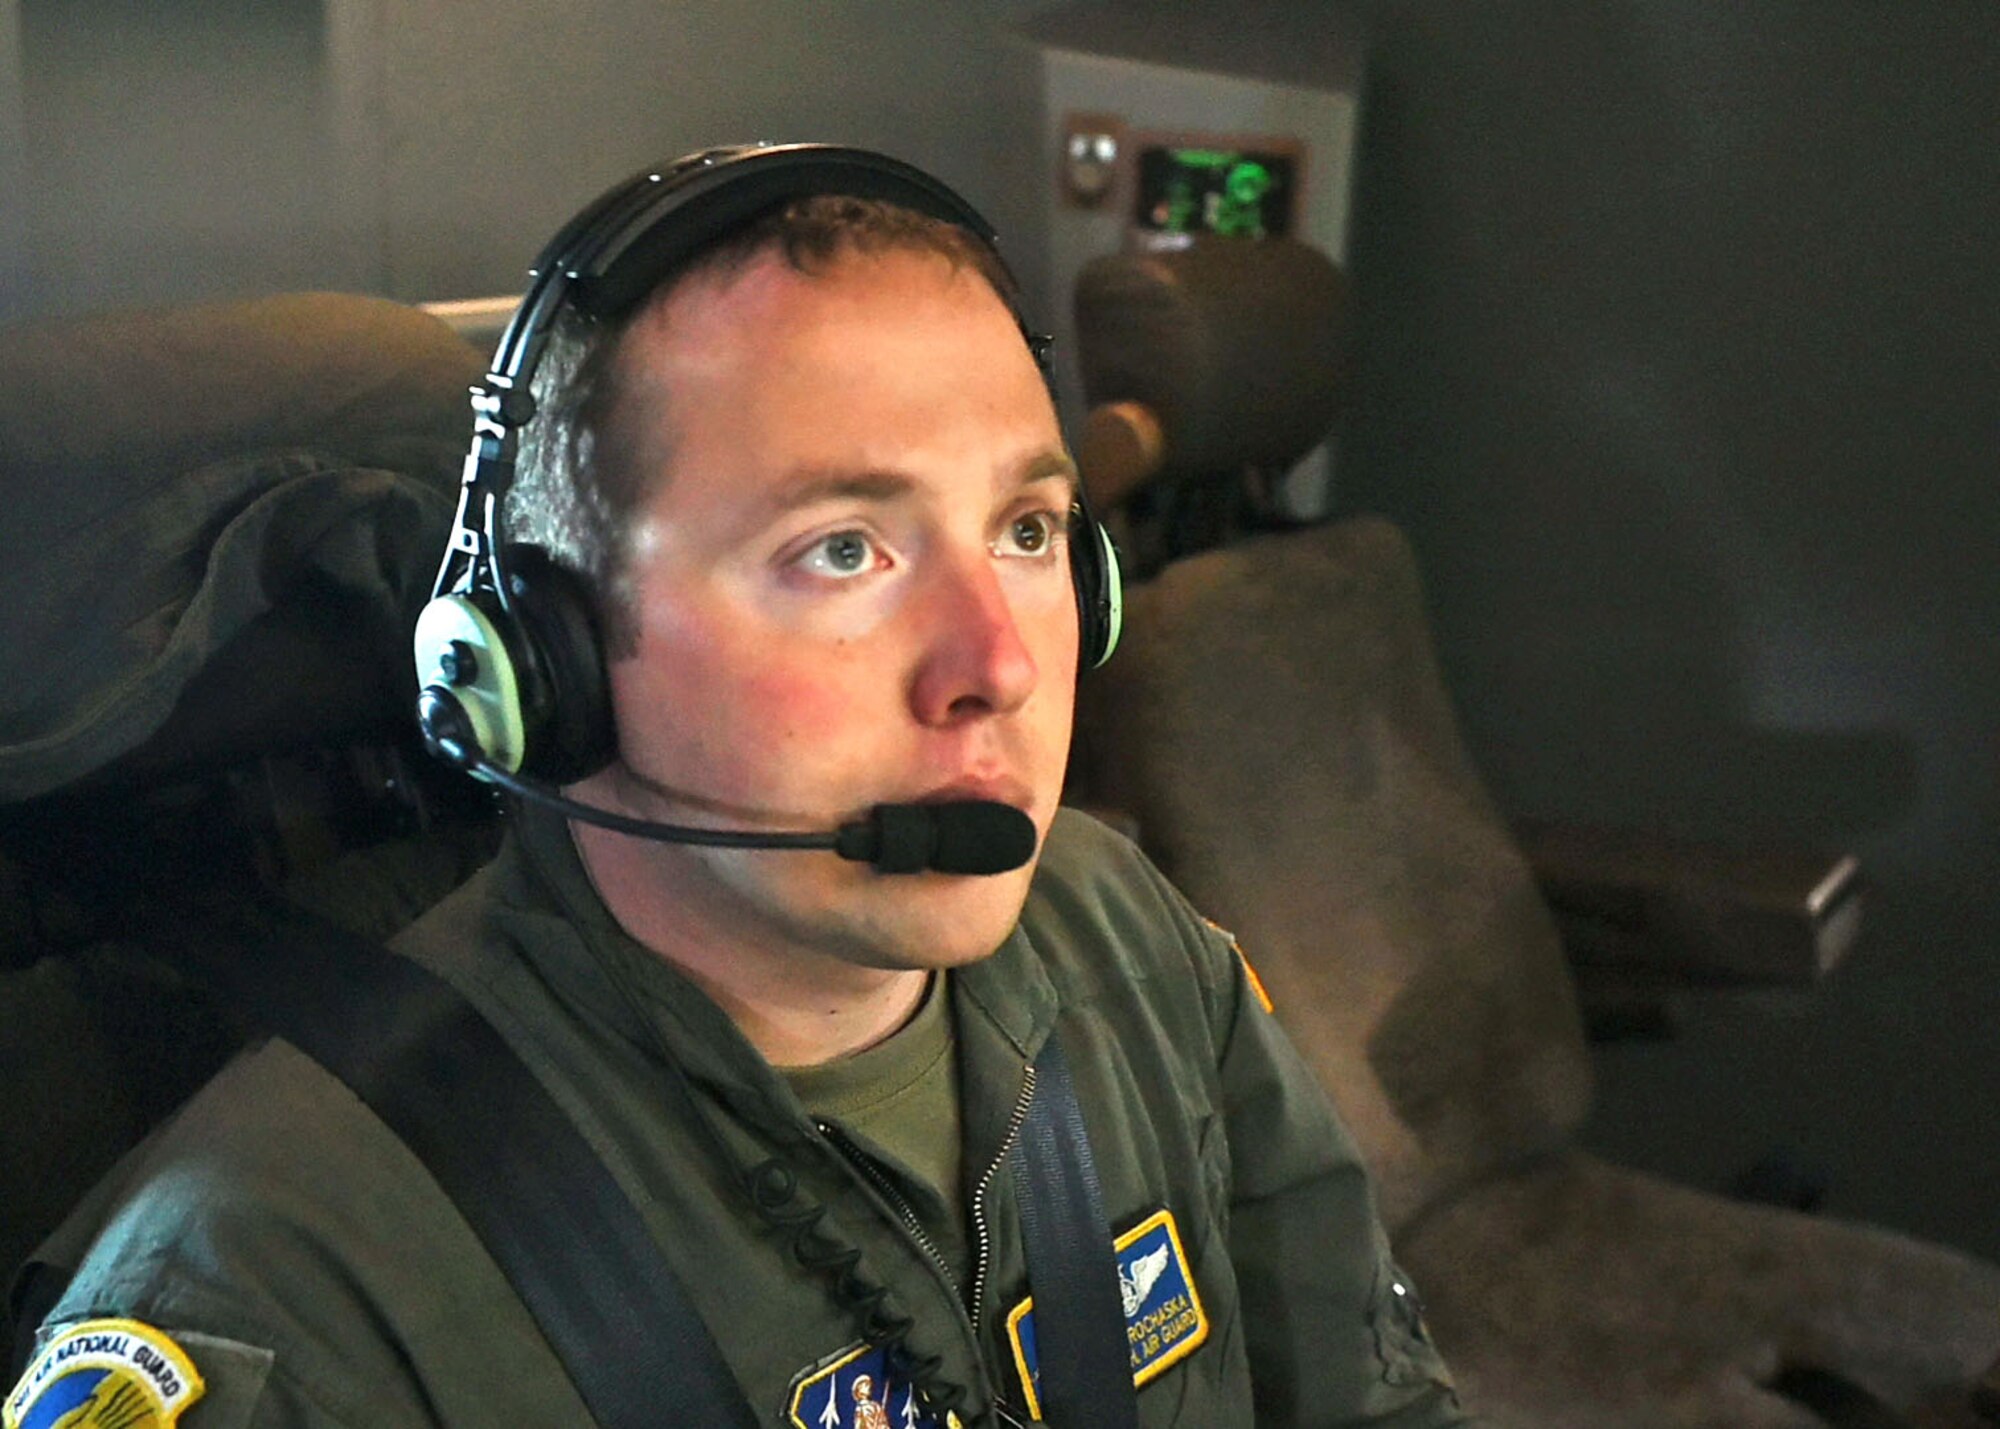 Tech. Sgt. Keith Prochaska, boom operator, 133rd Air Refueling Squadron, NHANG, works the controls of a refueling drogue aboard a KC-46A Pegasus during a refueling of Blue Angels F/A-18 Super Hornets.